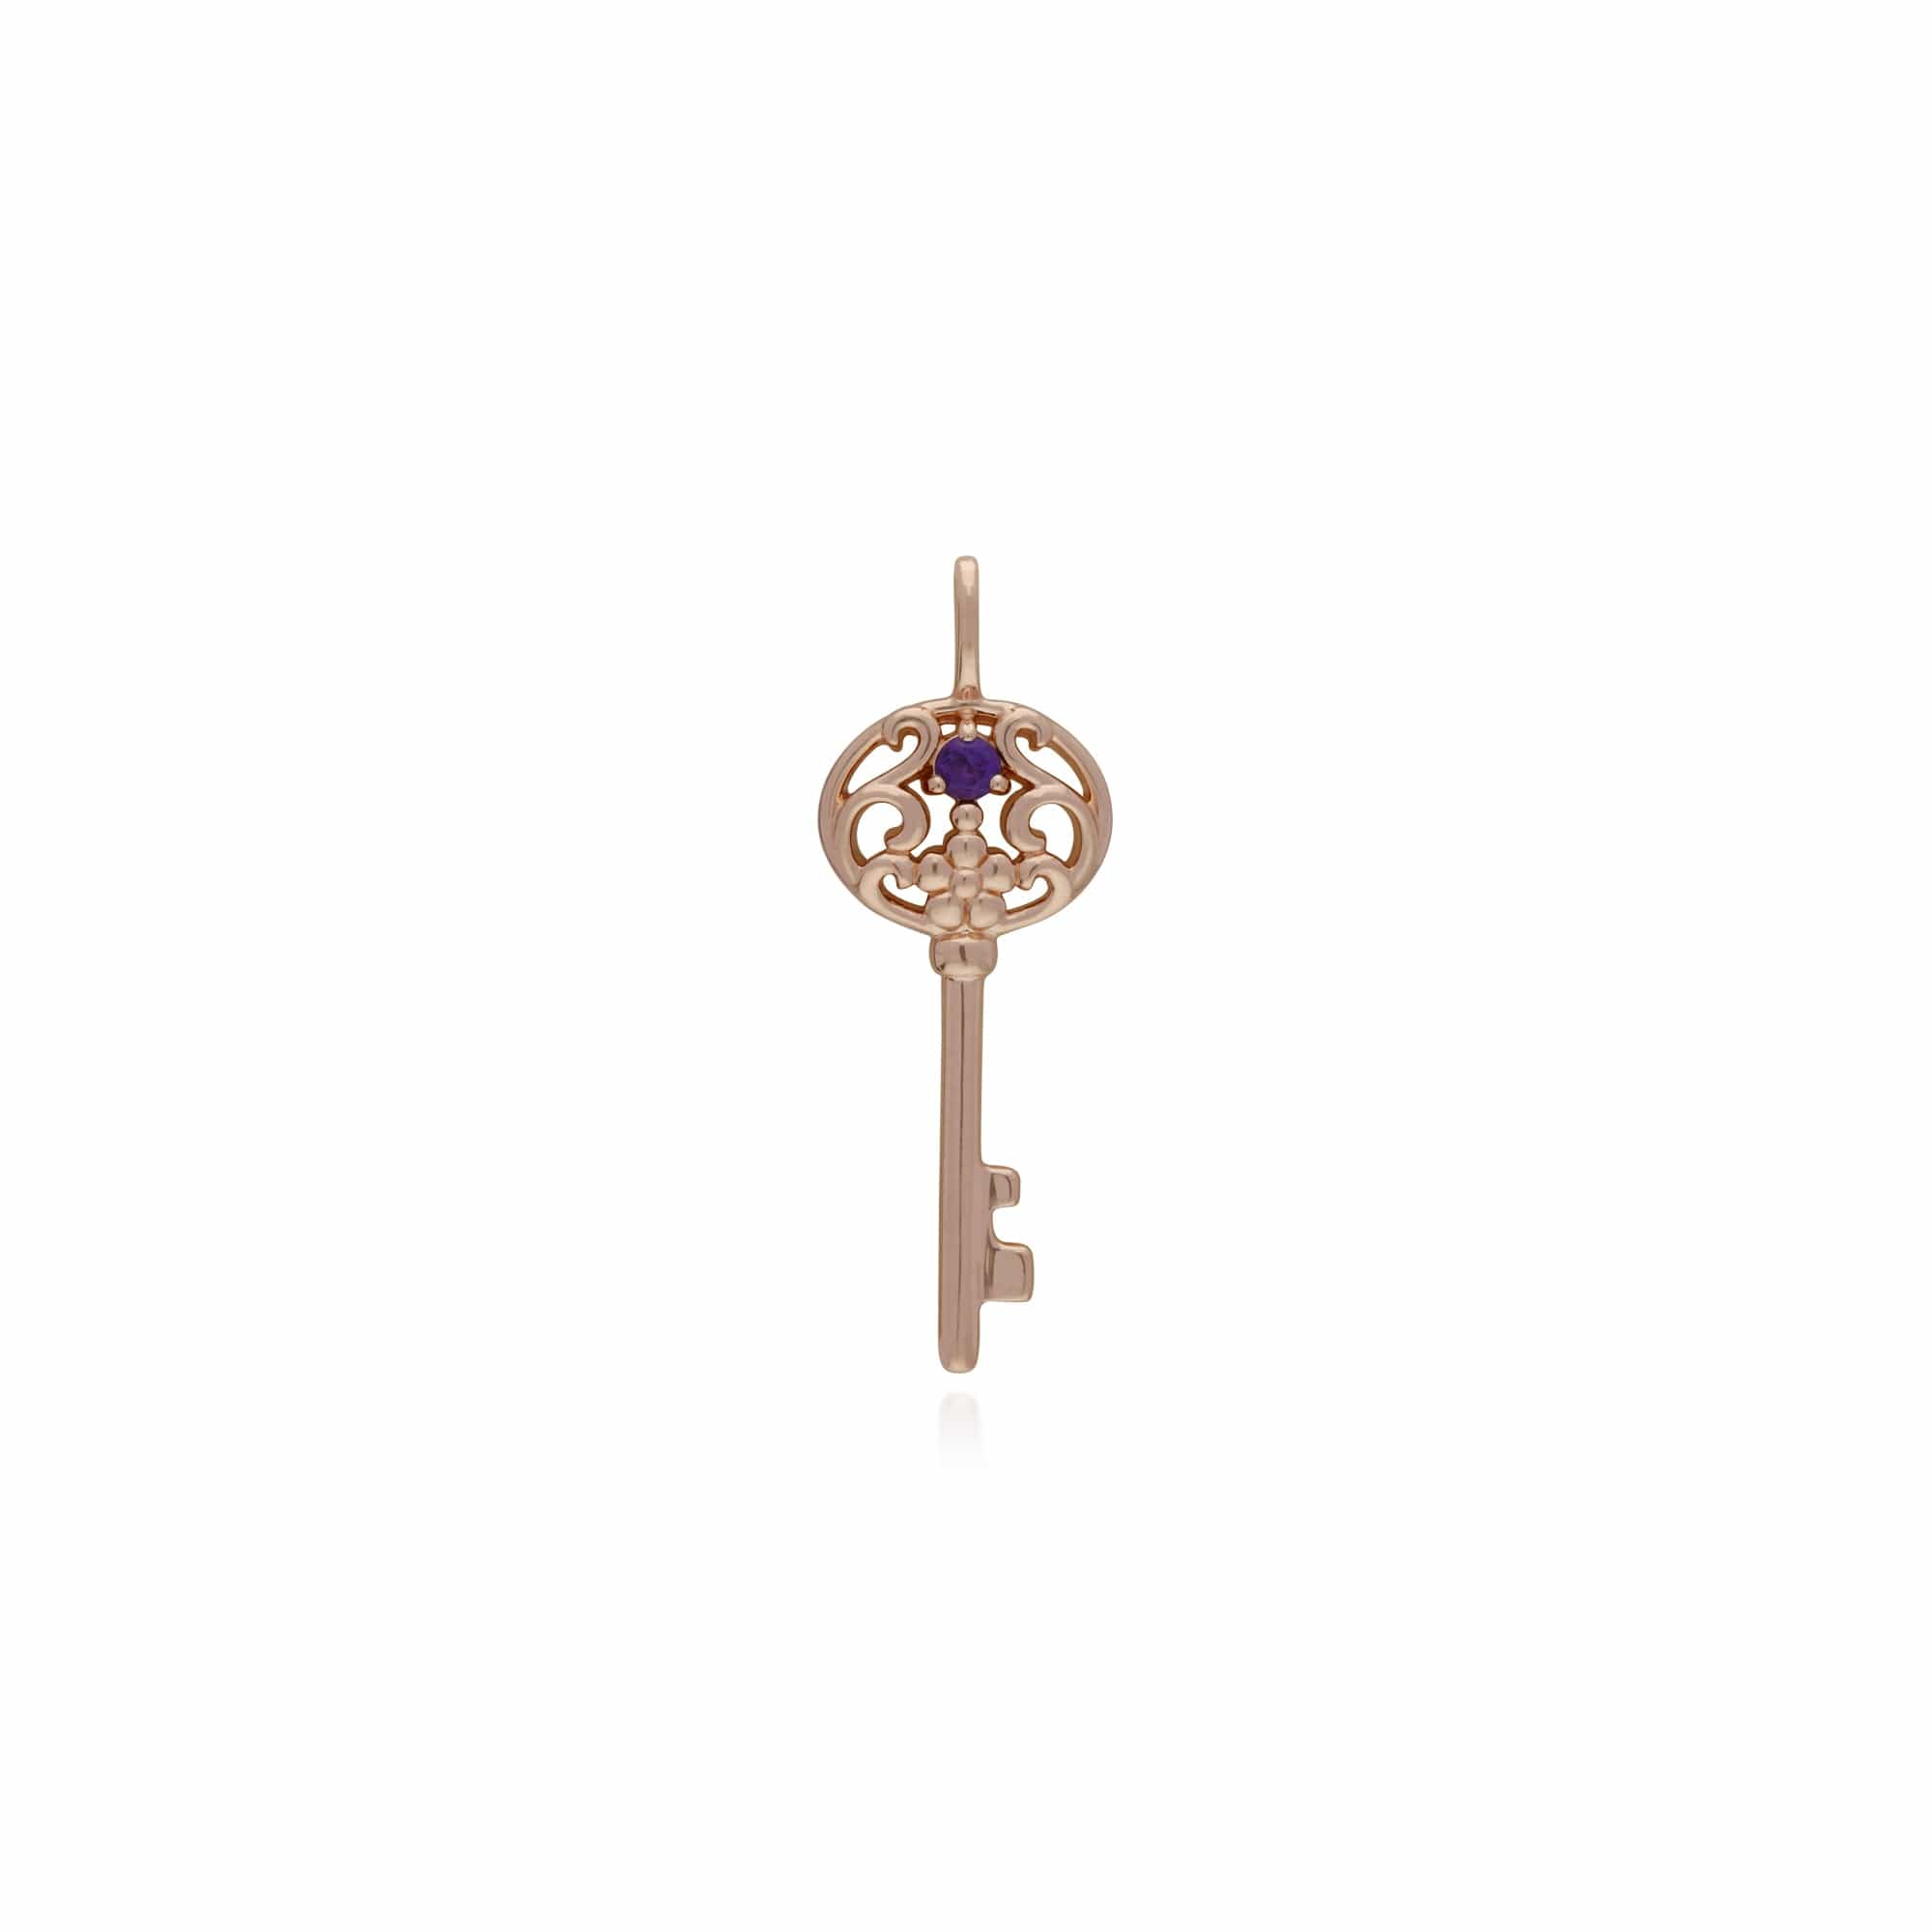 270P026705925-270P026901925 Classic Heart Lock Pendant & Amethyst Big Key Charm in Rose Gold Plated 925 Sterling Silver 2